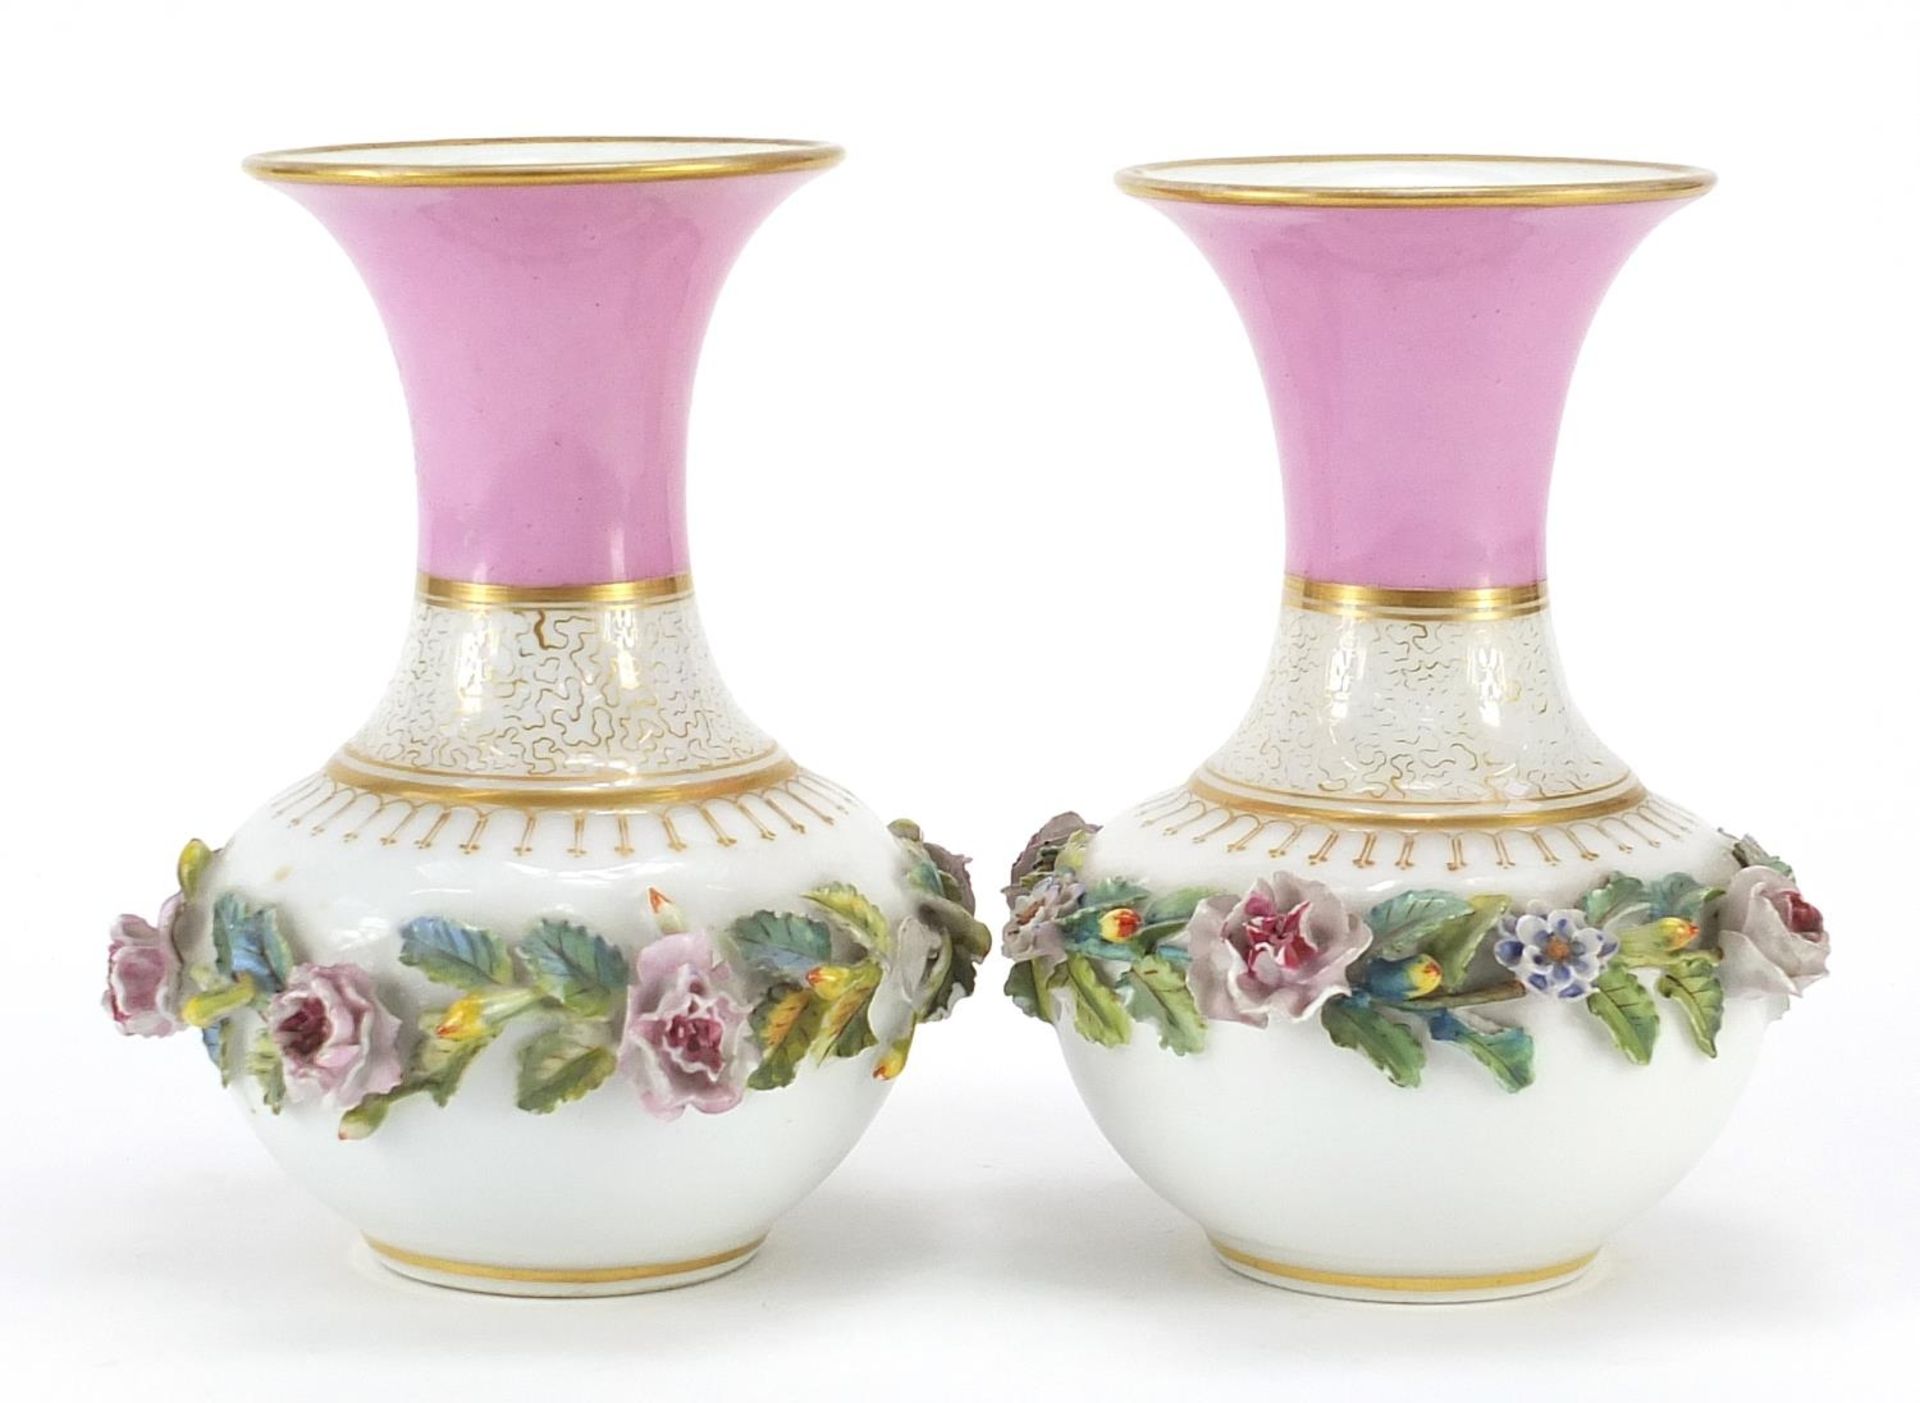 Pair of 19th century French pink ground vases with floral encrusted band, each 16cm high